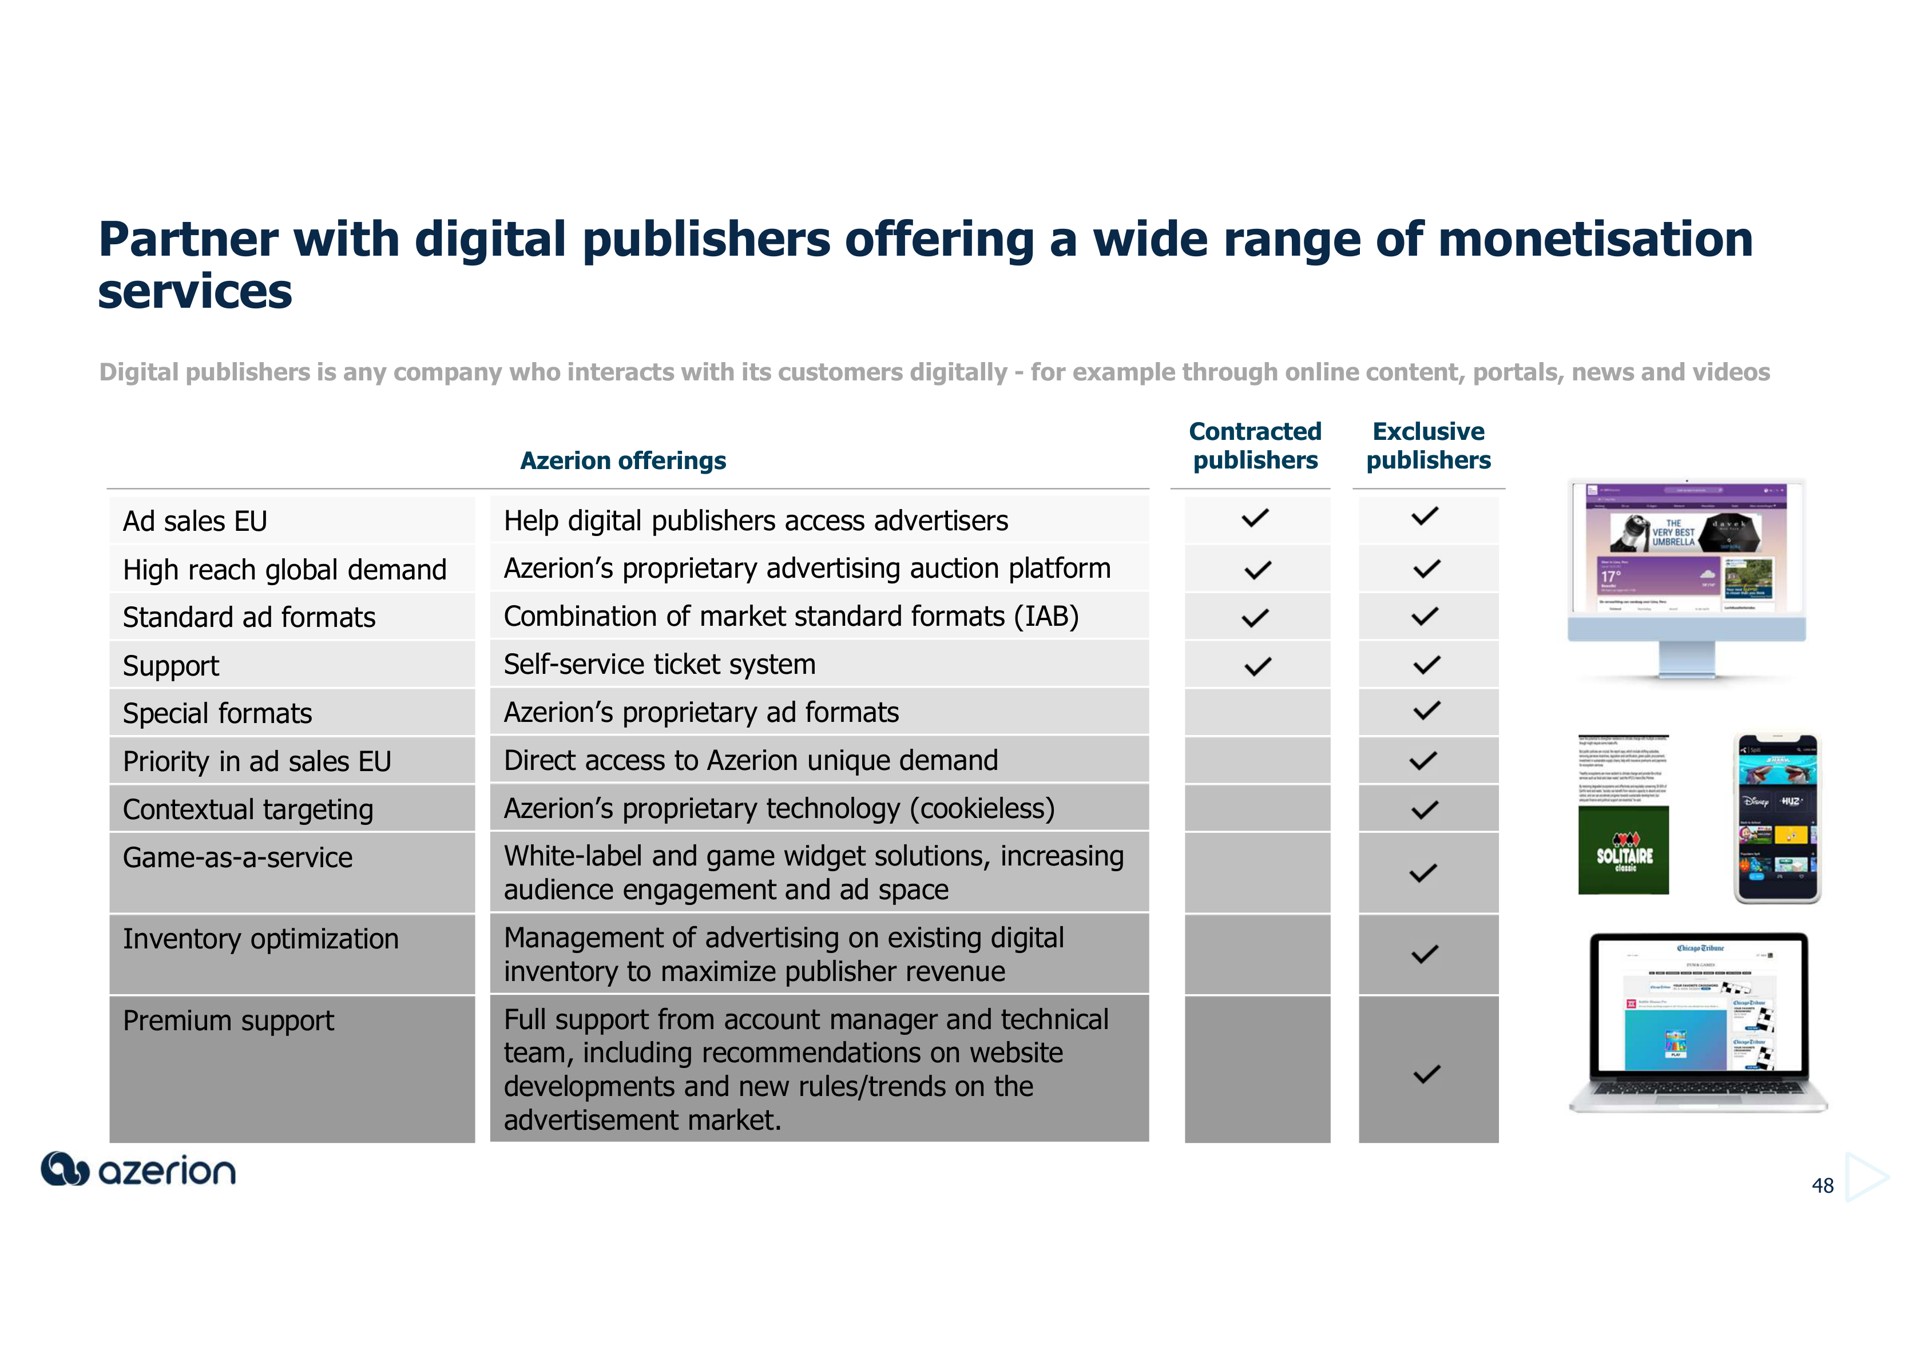 partner with digital publishers offering a wide range of services standard formats combination market standard formats | Azerion